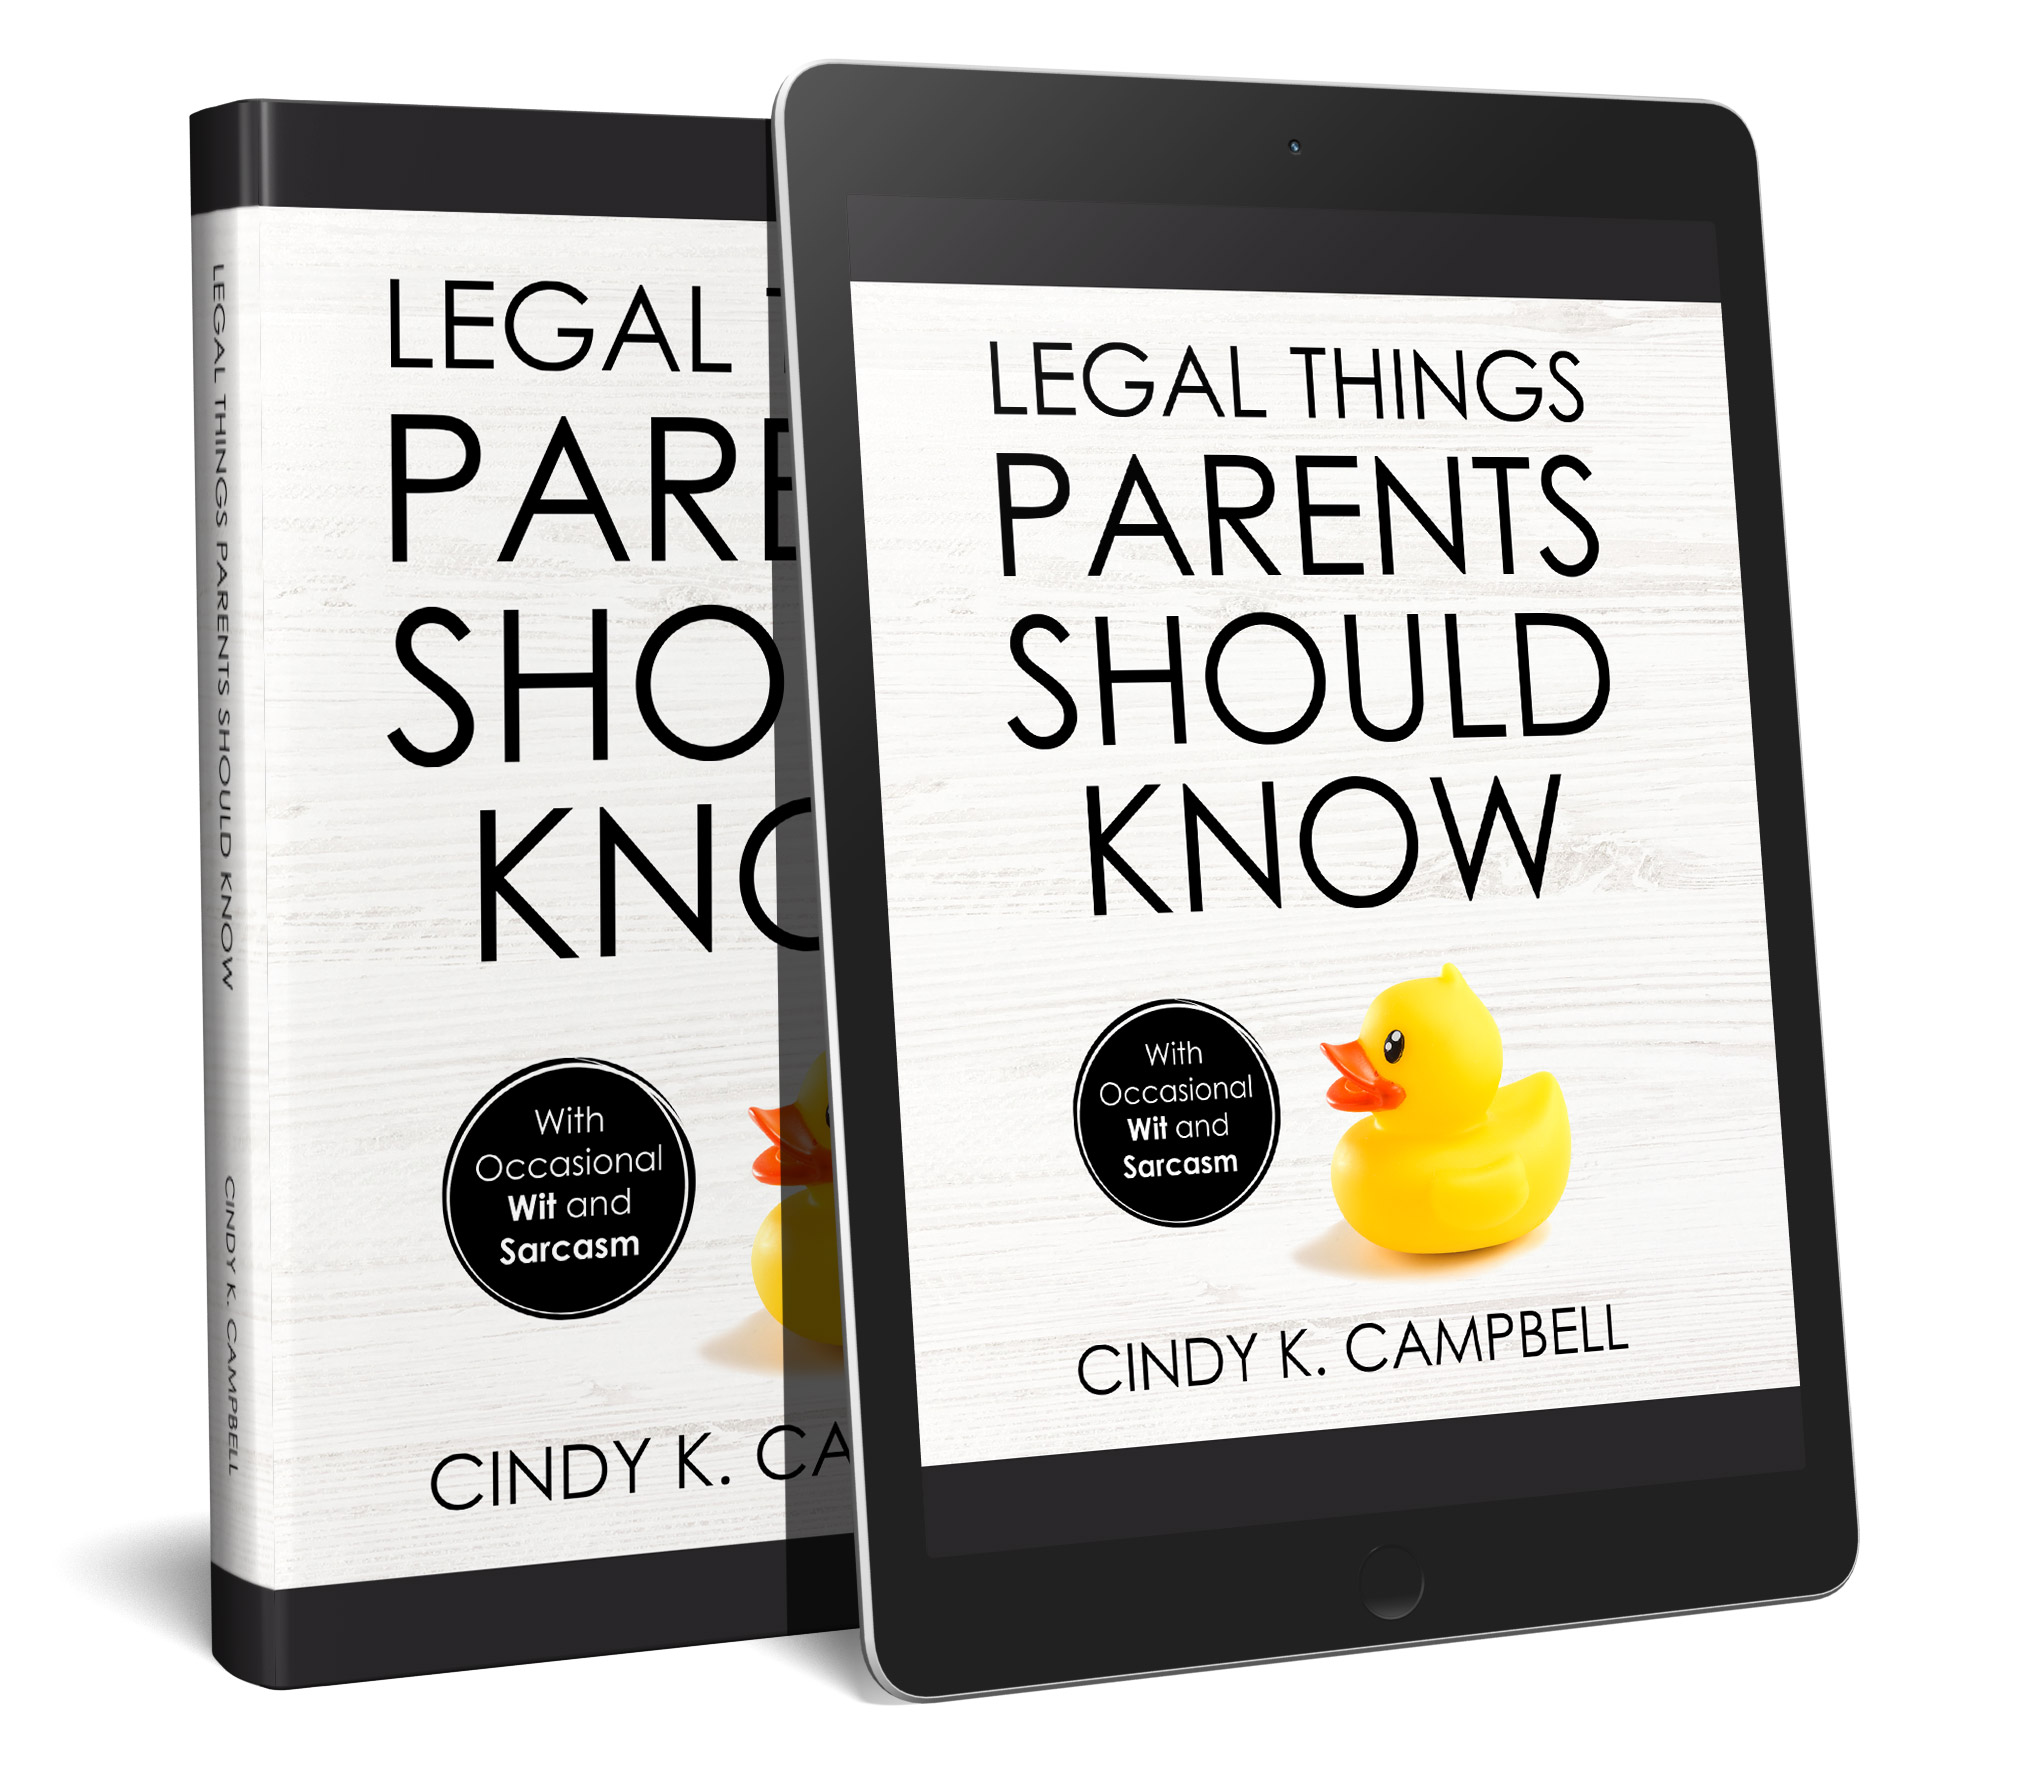 legal-things-parents-should-know-book-campbell-holzhauer-&-nagle-obarski